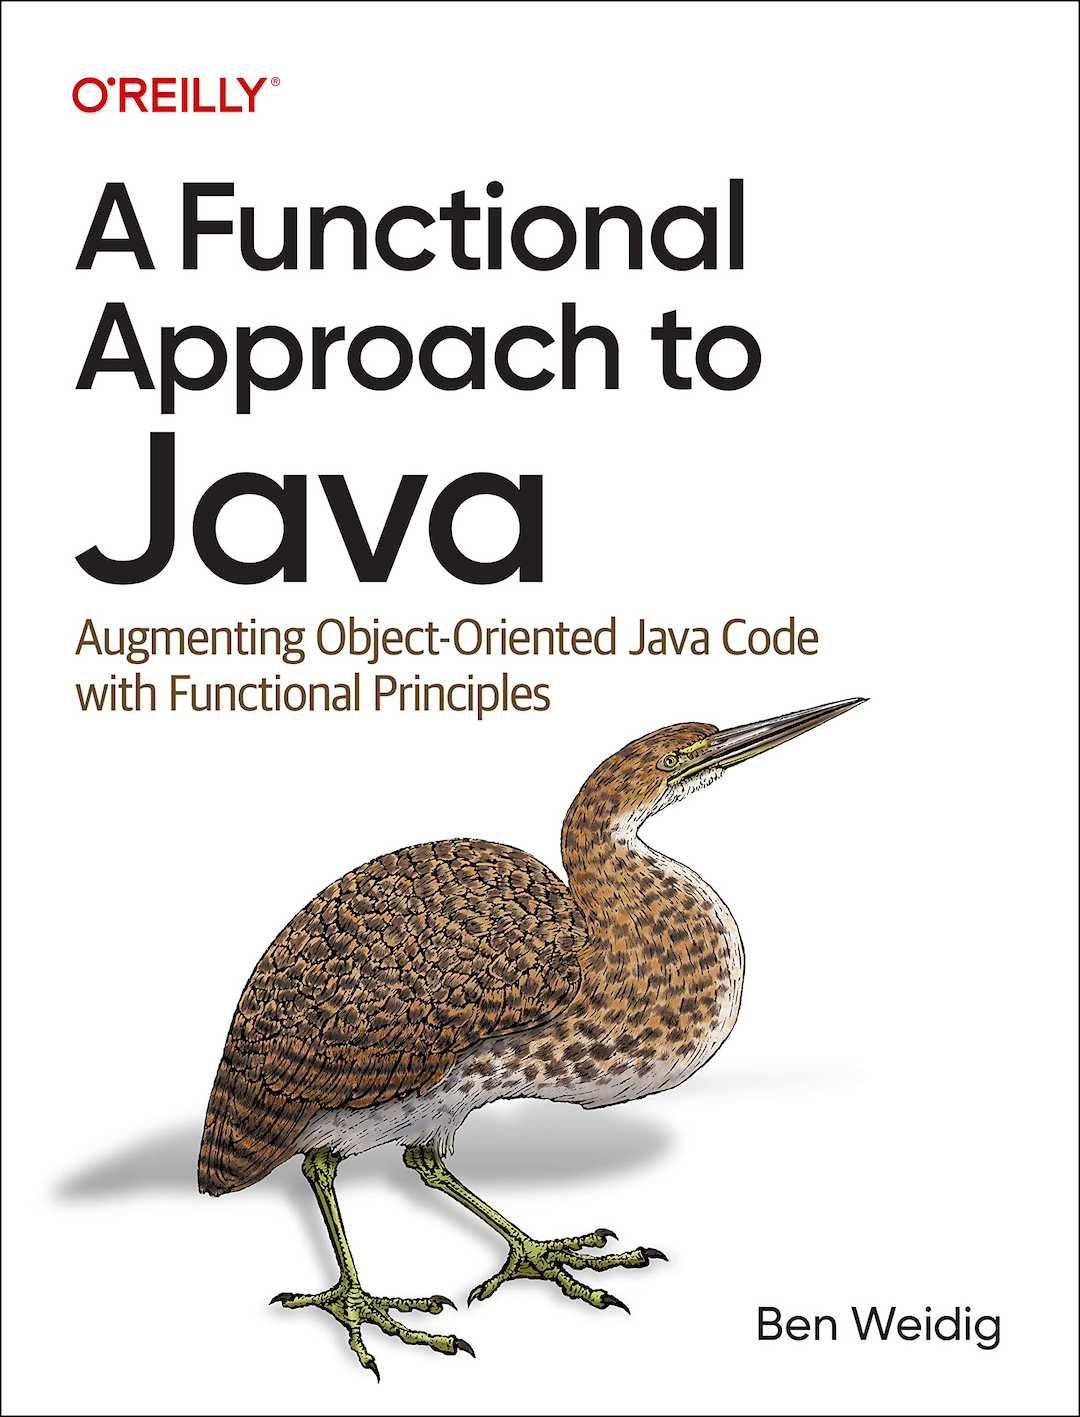 <a href="https://a-functional-approach-to-java.com/">A Functional Approach to Java</a>